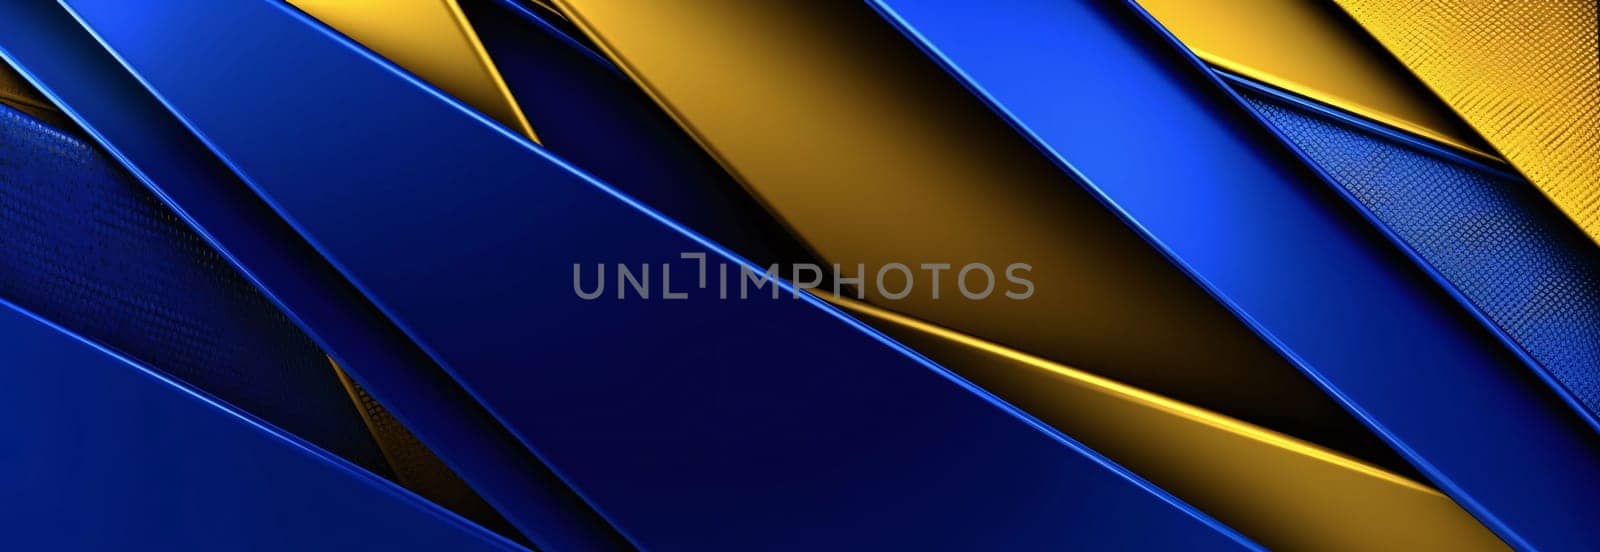 Abstract background design: Abstract blue and yellow metallic background. 3D illustration. 3D CG. High resolution